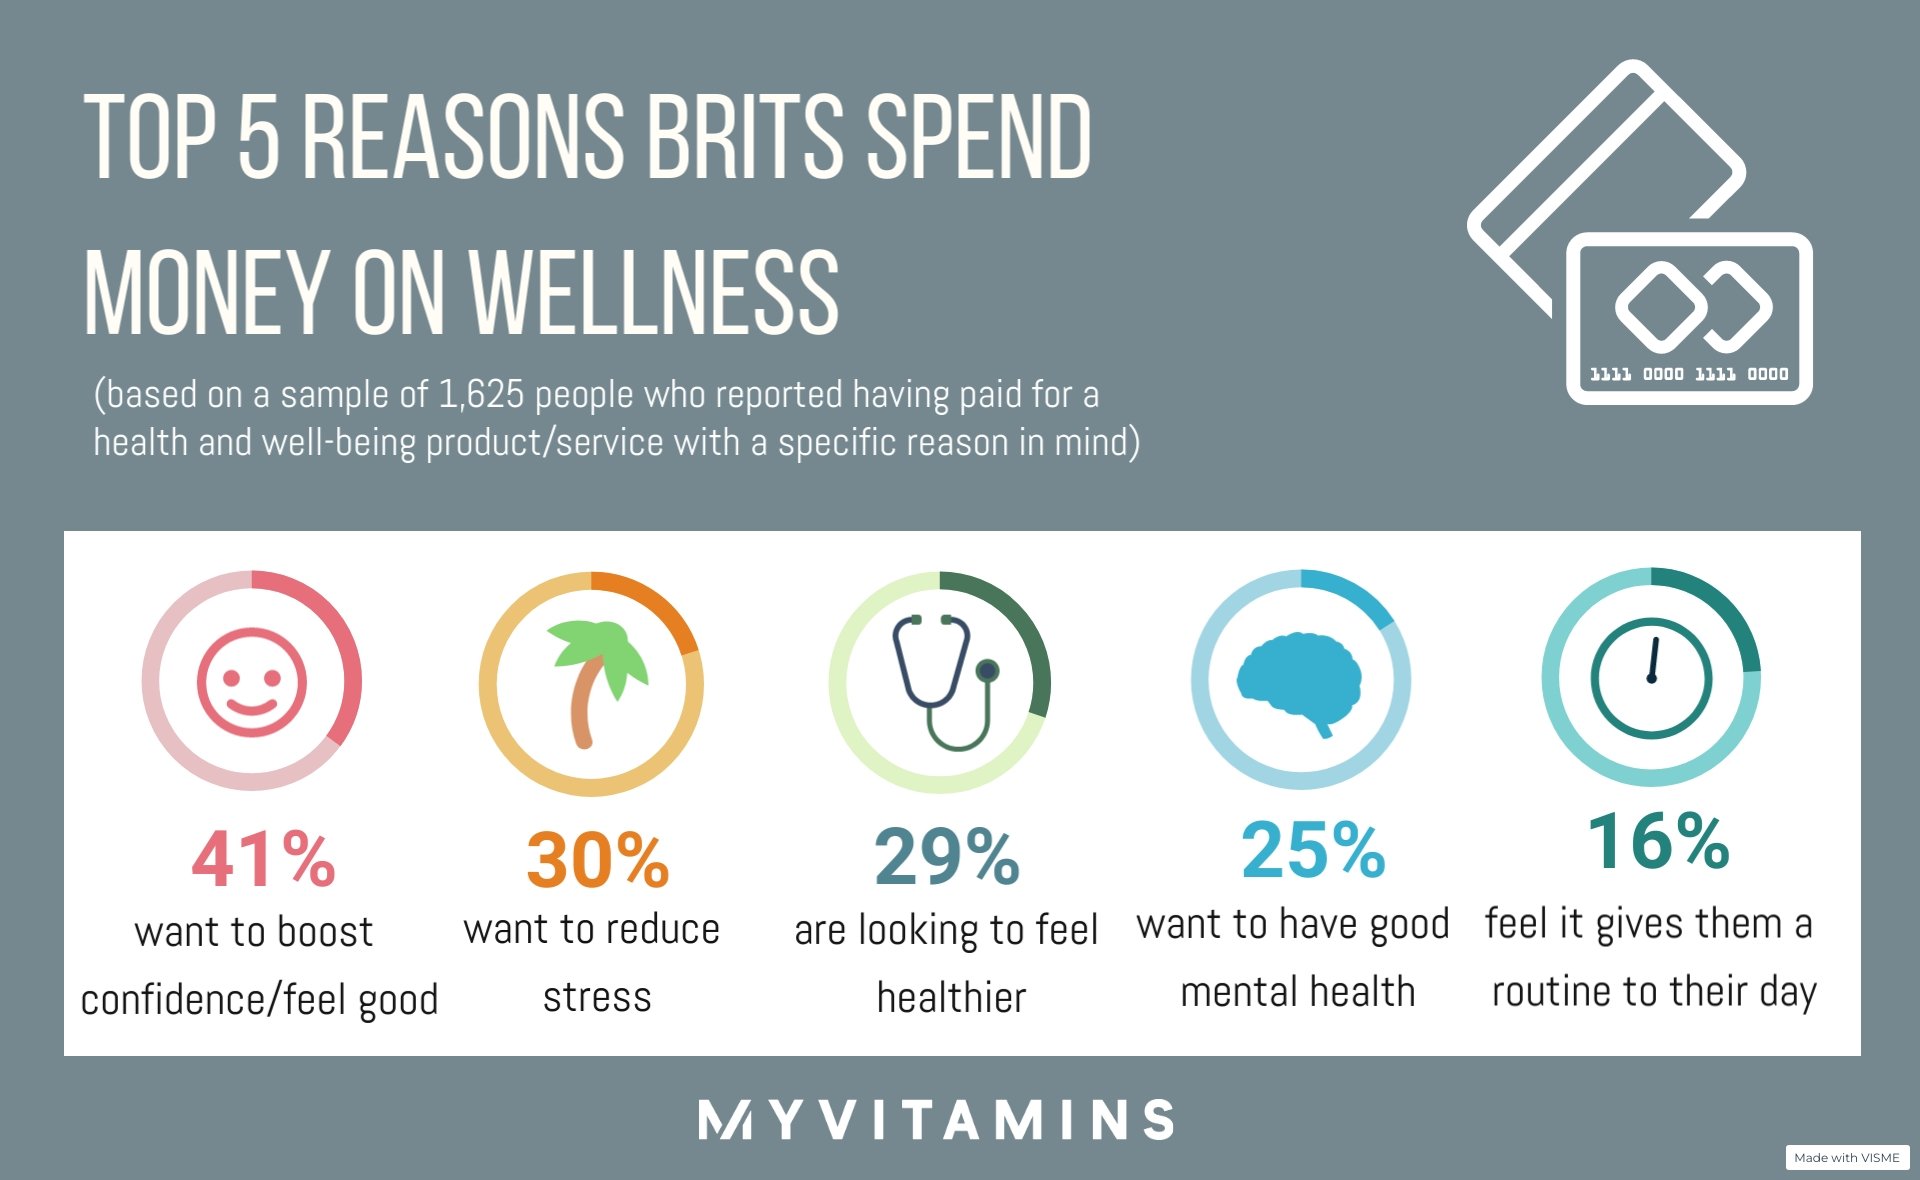 Top reasons for Brits spending money on wellness